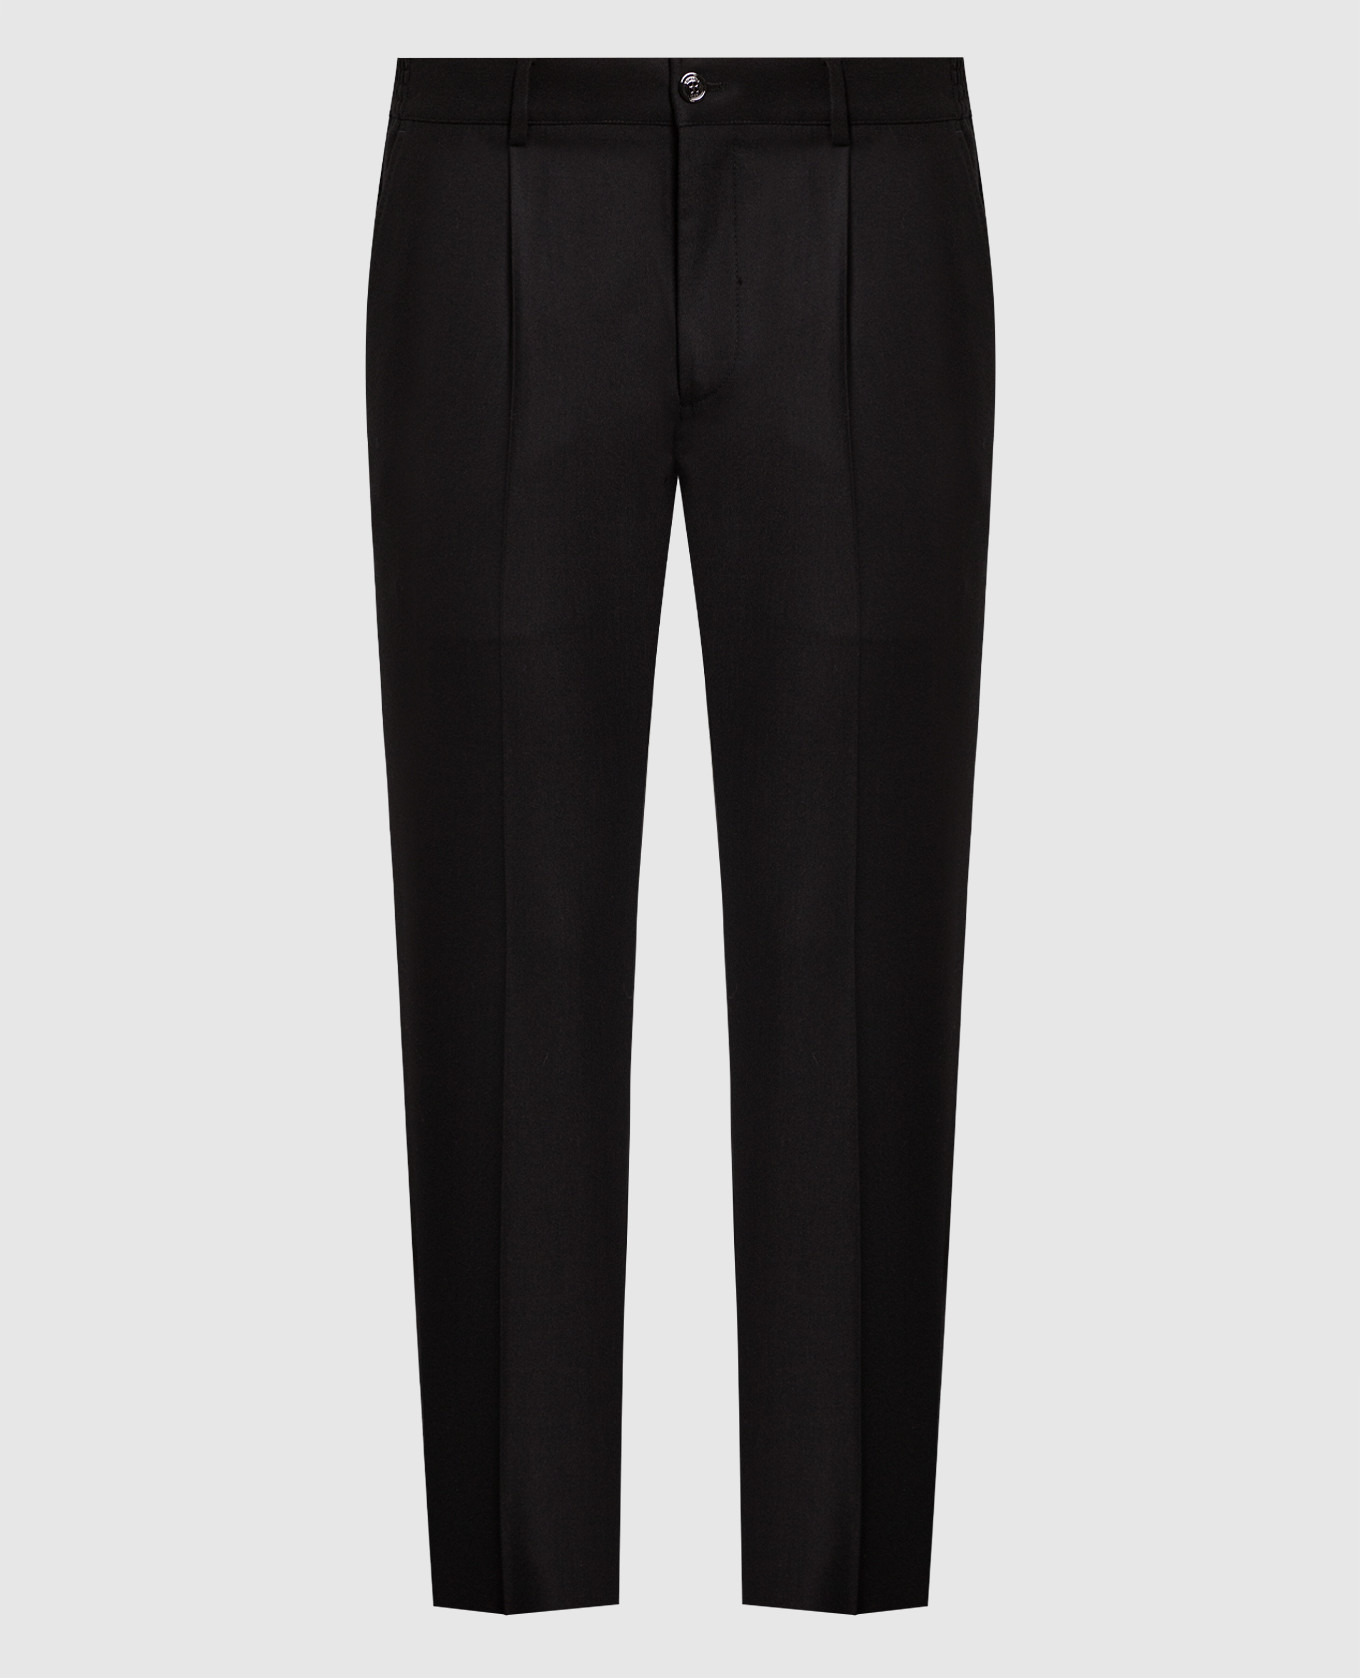 Black wool and cashmere pants